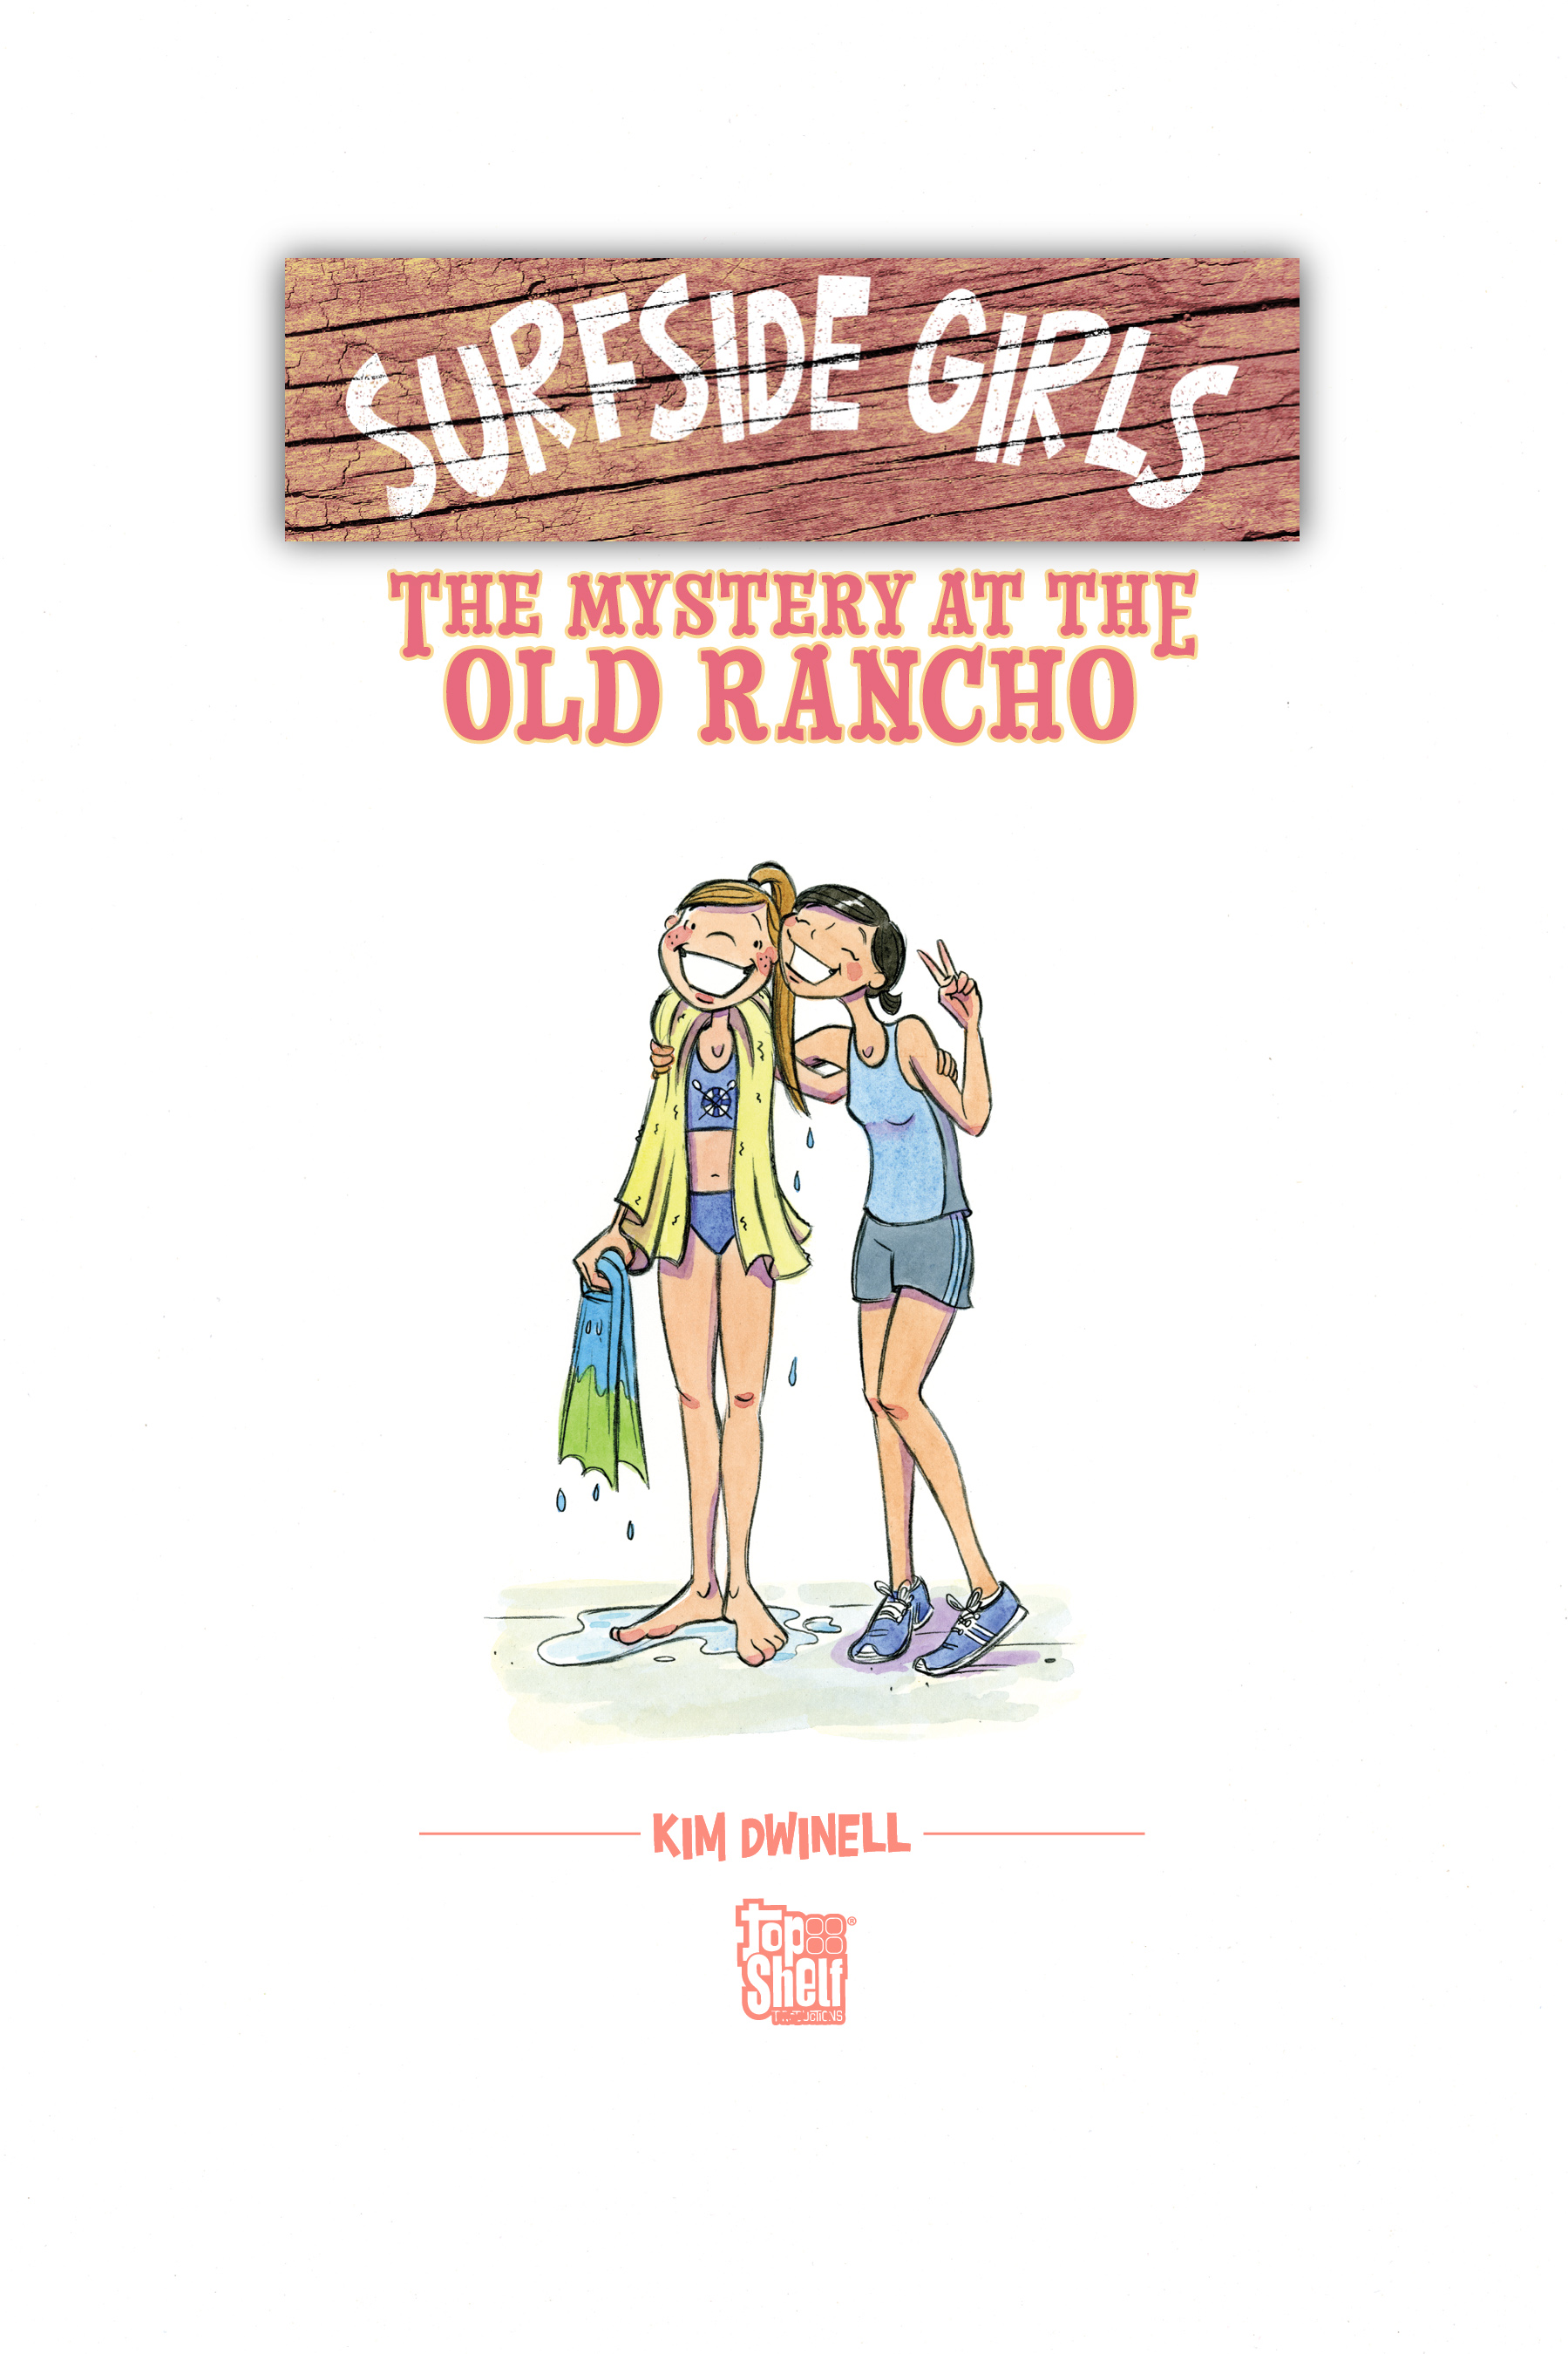 Read online Surfside Girls: The Mystery At the Old Rancho comic -  Issue # TPB (Part 1) - 3